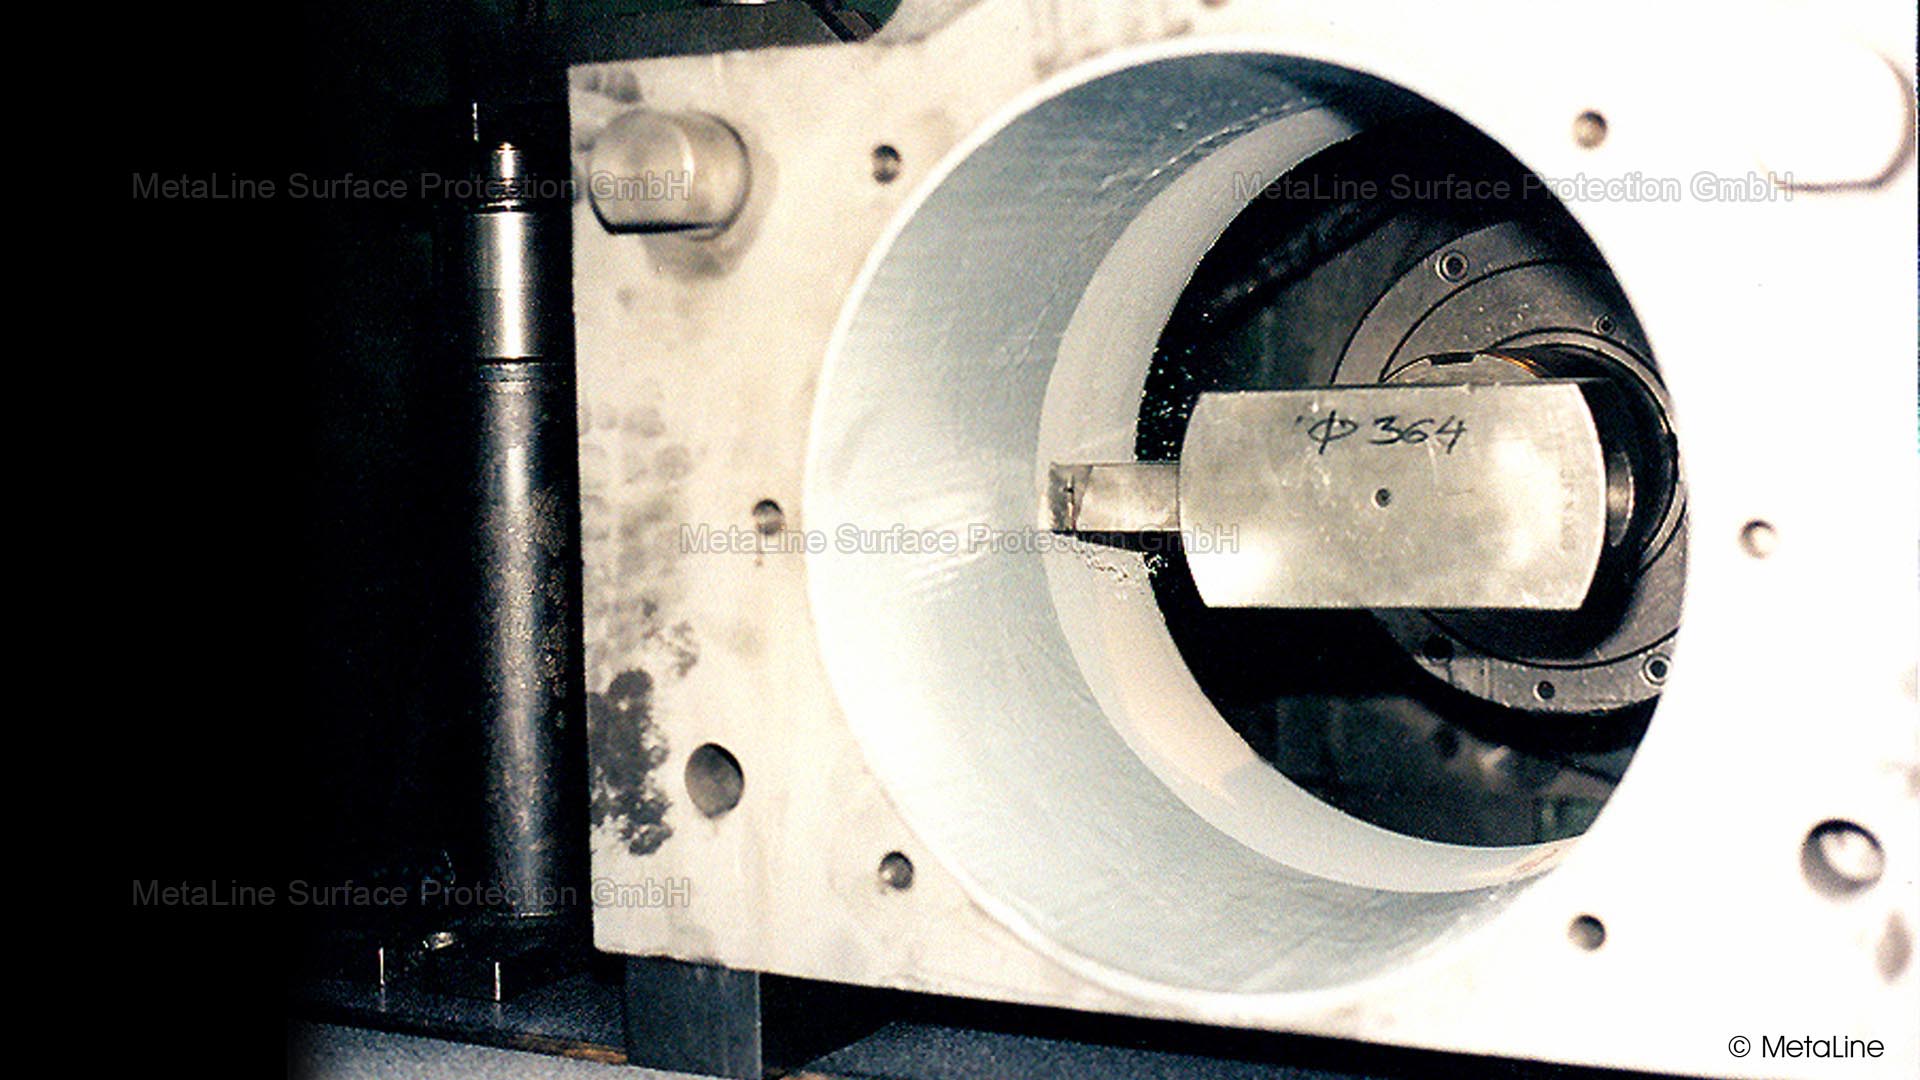 <!-- START: ConditionalContent --> heavy bearing housing, lathe out, machaning, restore fit, bearing seat <!-- END: ConditionalContent -->   <!-- START: ConditionalContent --><!-- END: ConditionalContent -->   <!-- START: ConditionalContent --><!-- END: ConditionalContent --> <!-- START: ConditionalContent --><!-- END: ConditionalContent -->